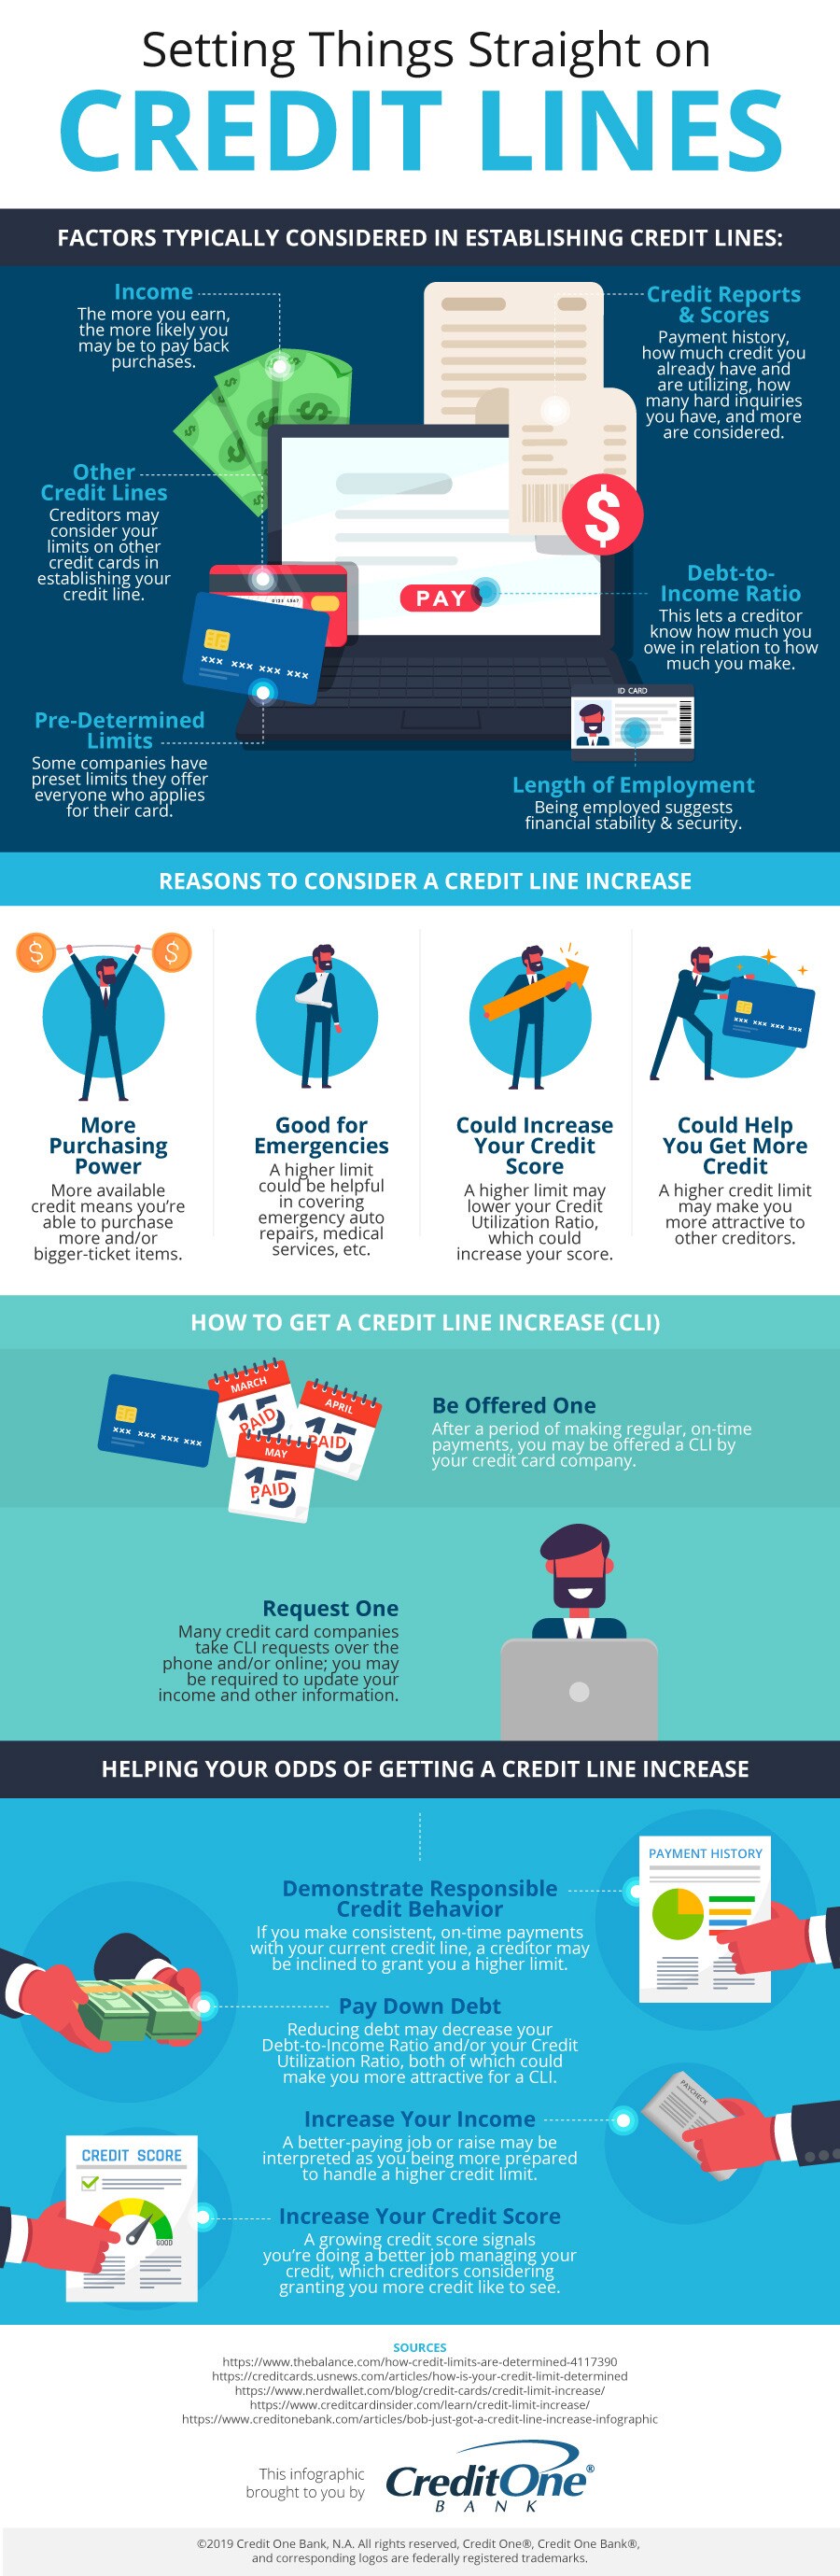 Credit Lines and Credit Line Increases [Infographic]